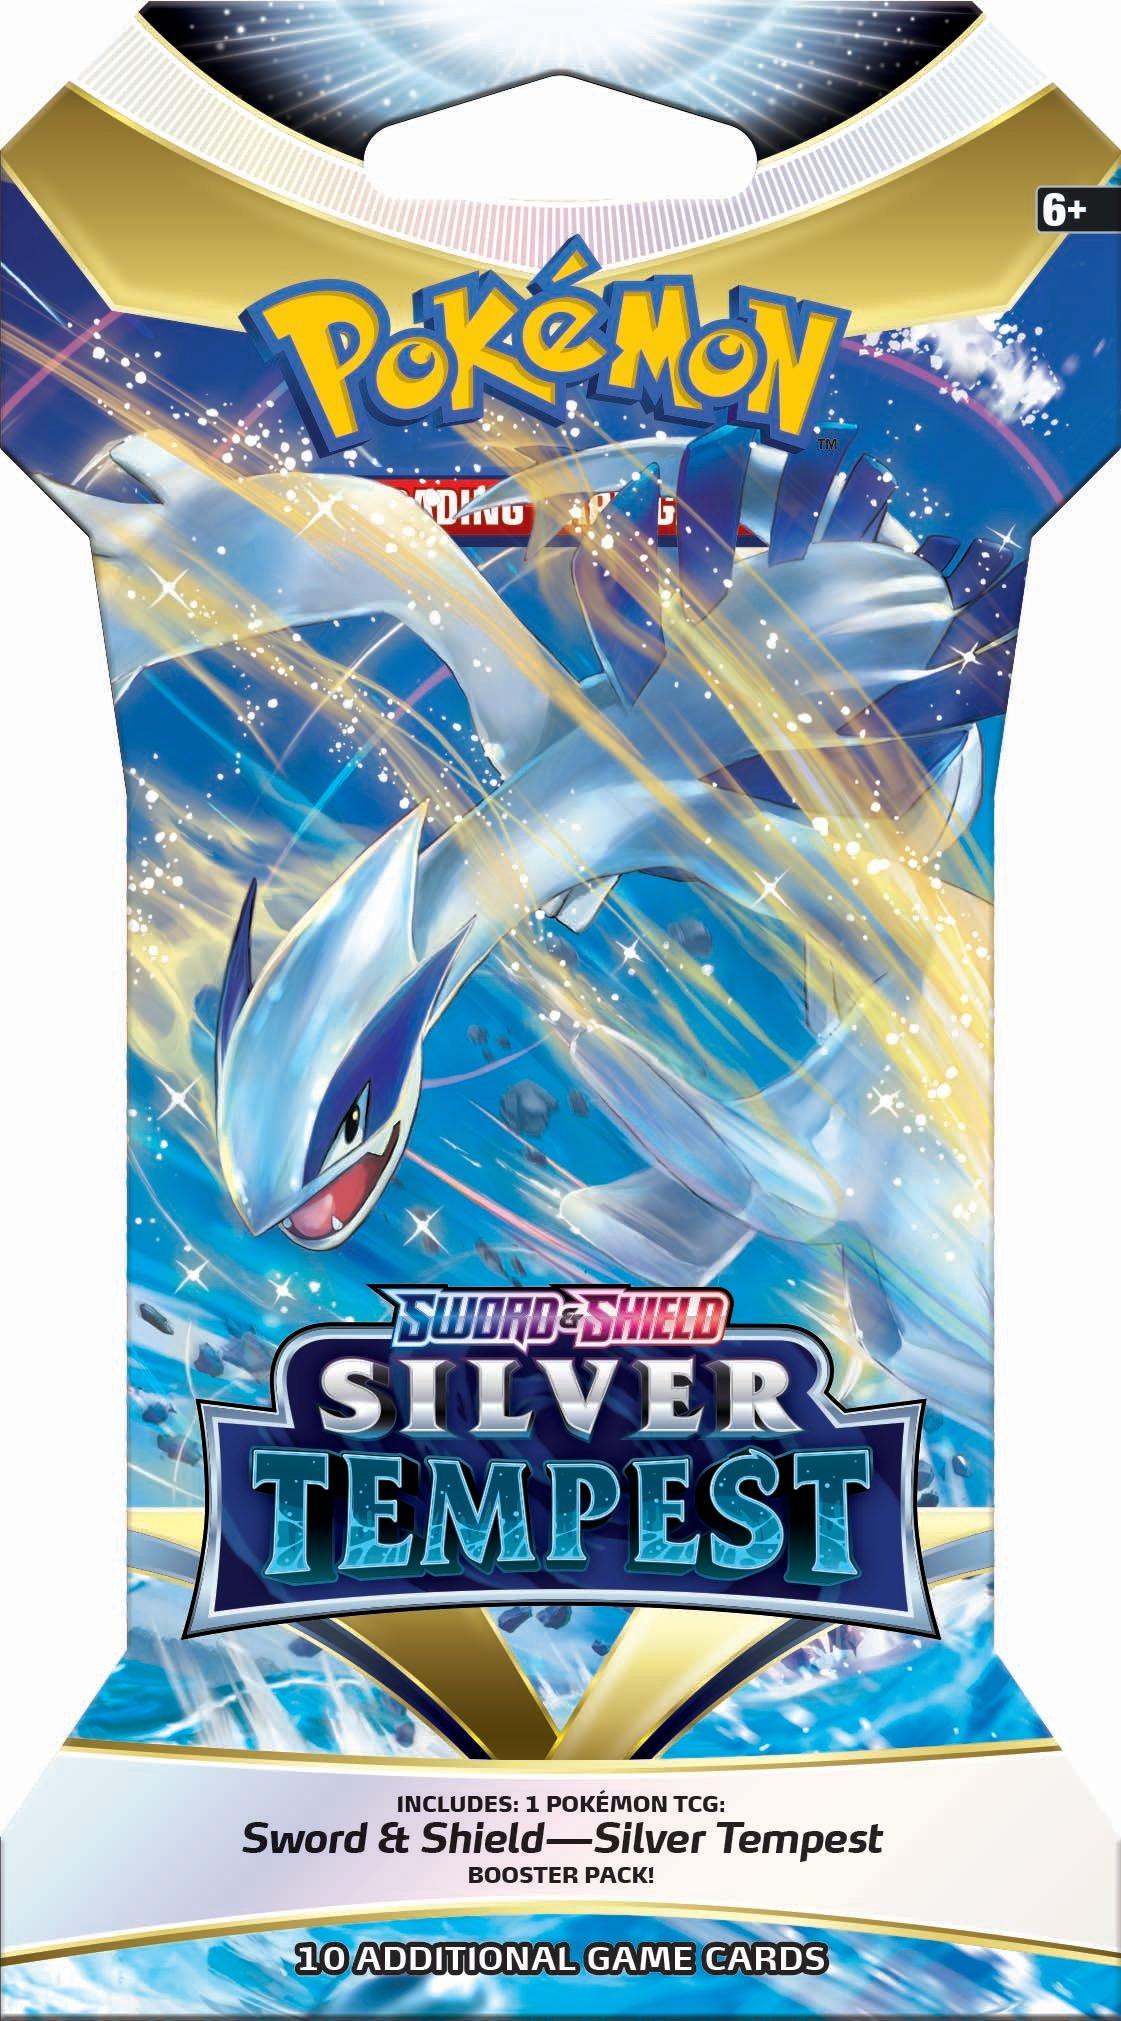 Pokemon Trading Card Game: Sword and Shield Silver Tempest Booster Pack